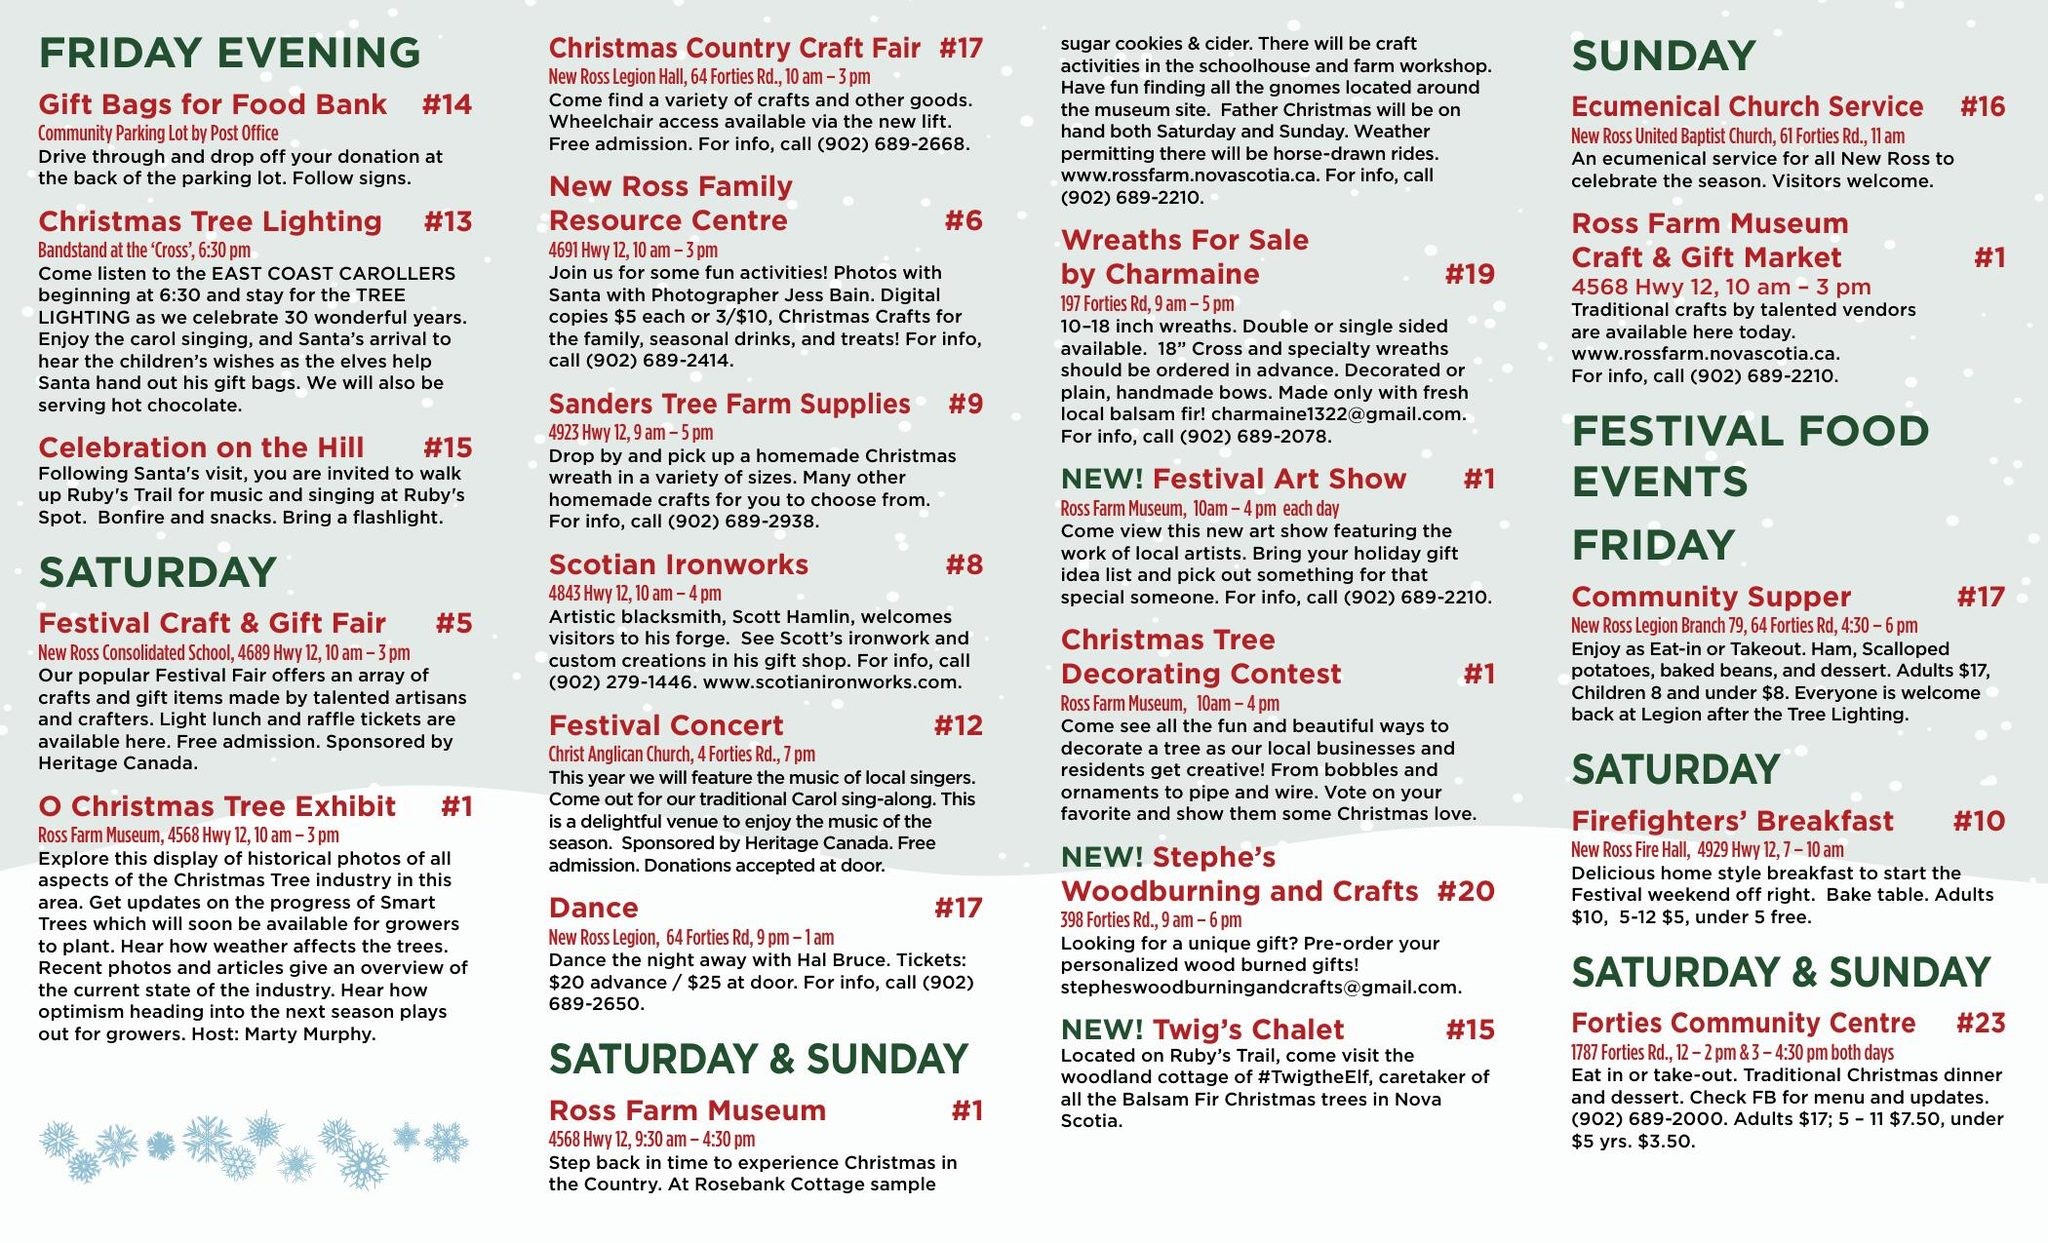 New Ross Christmas Festival schedule